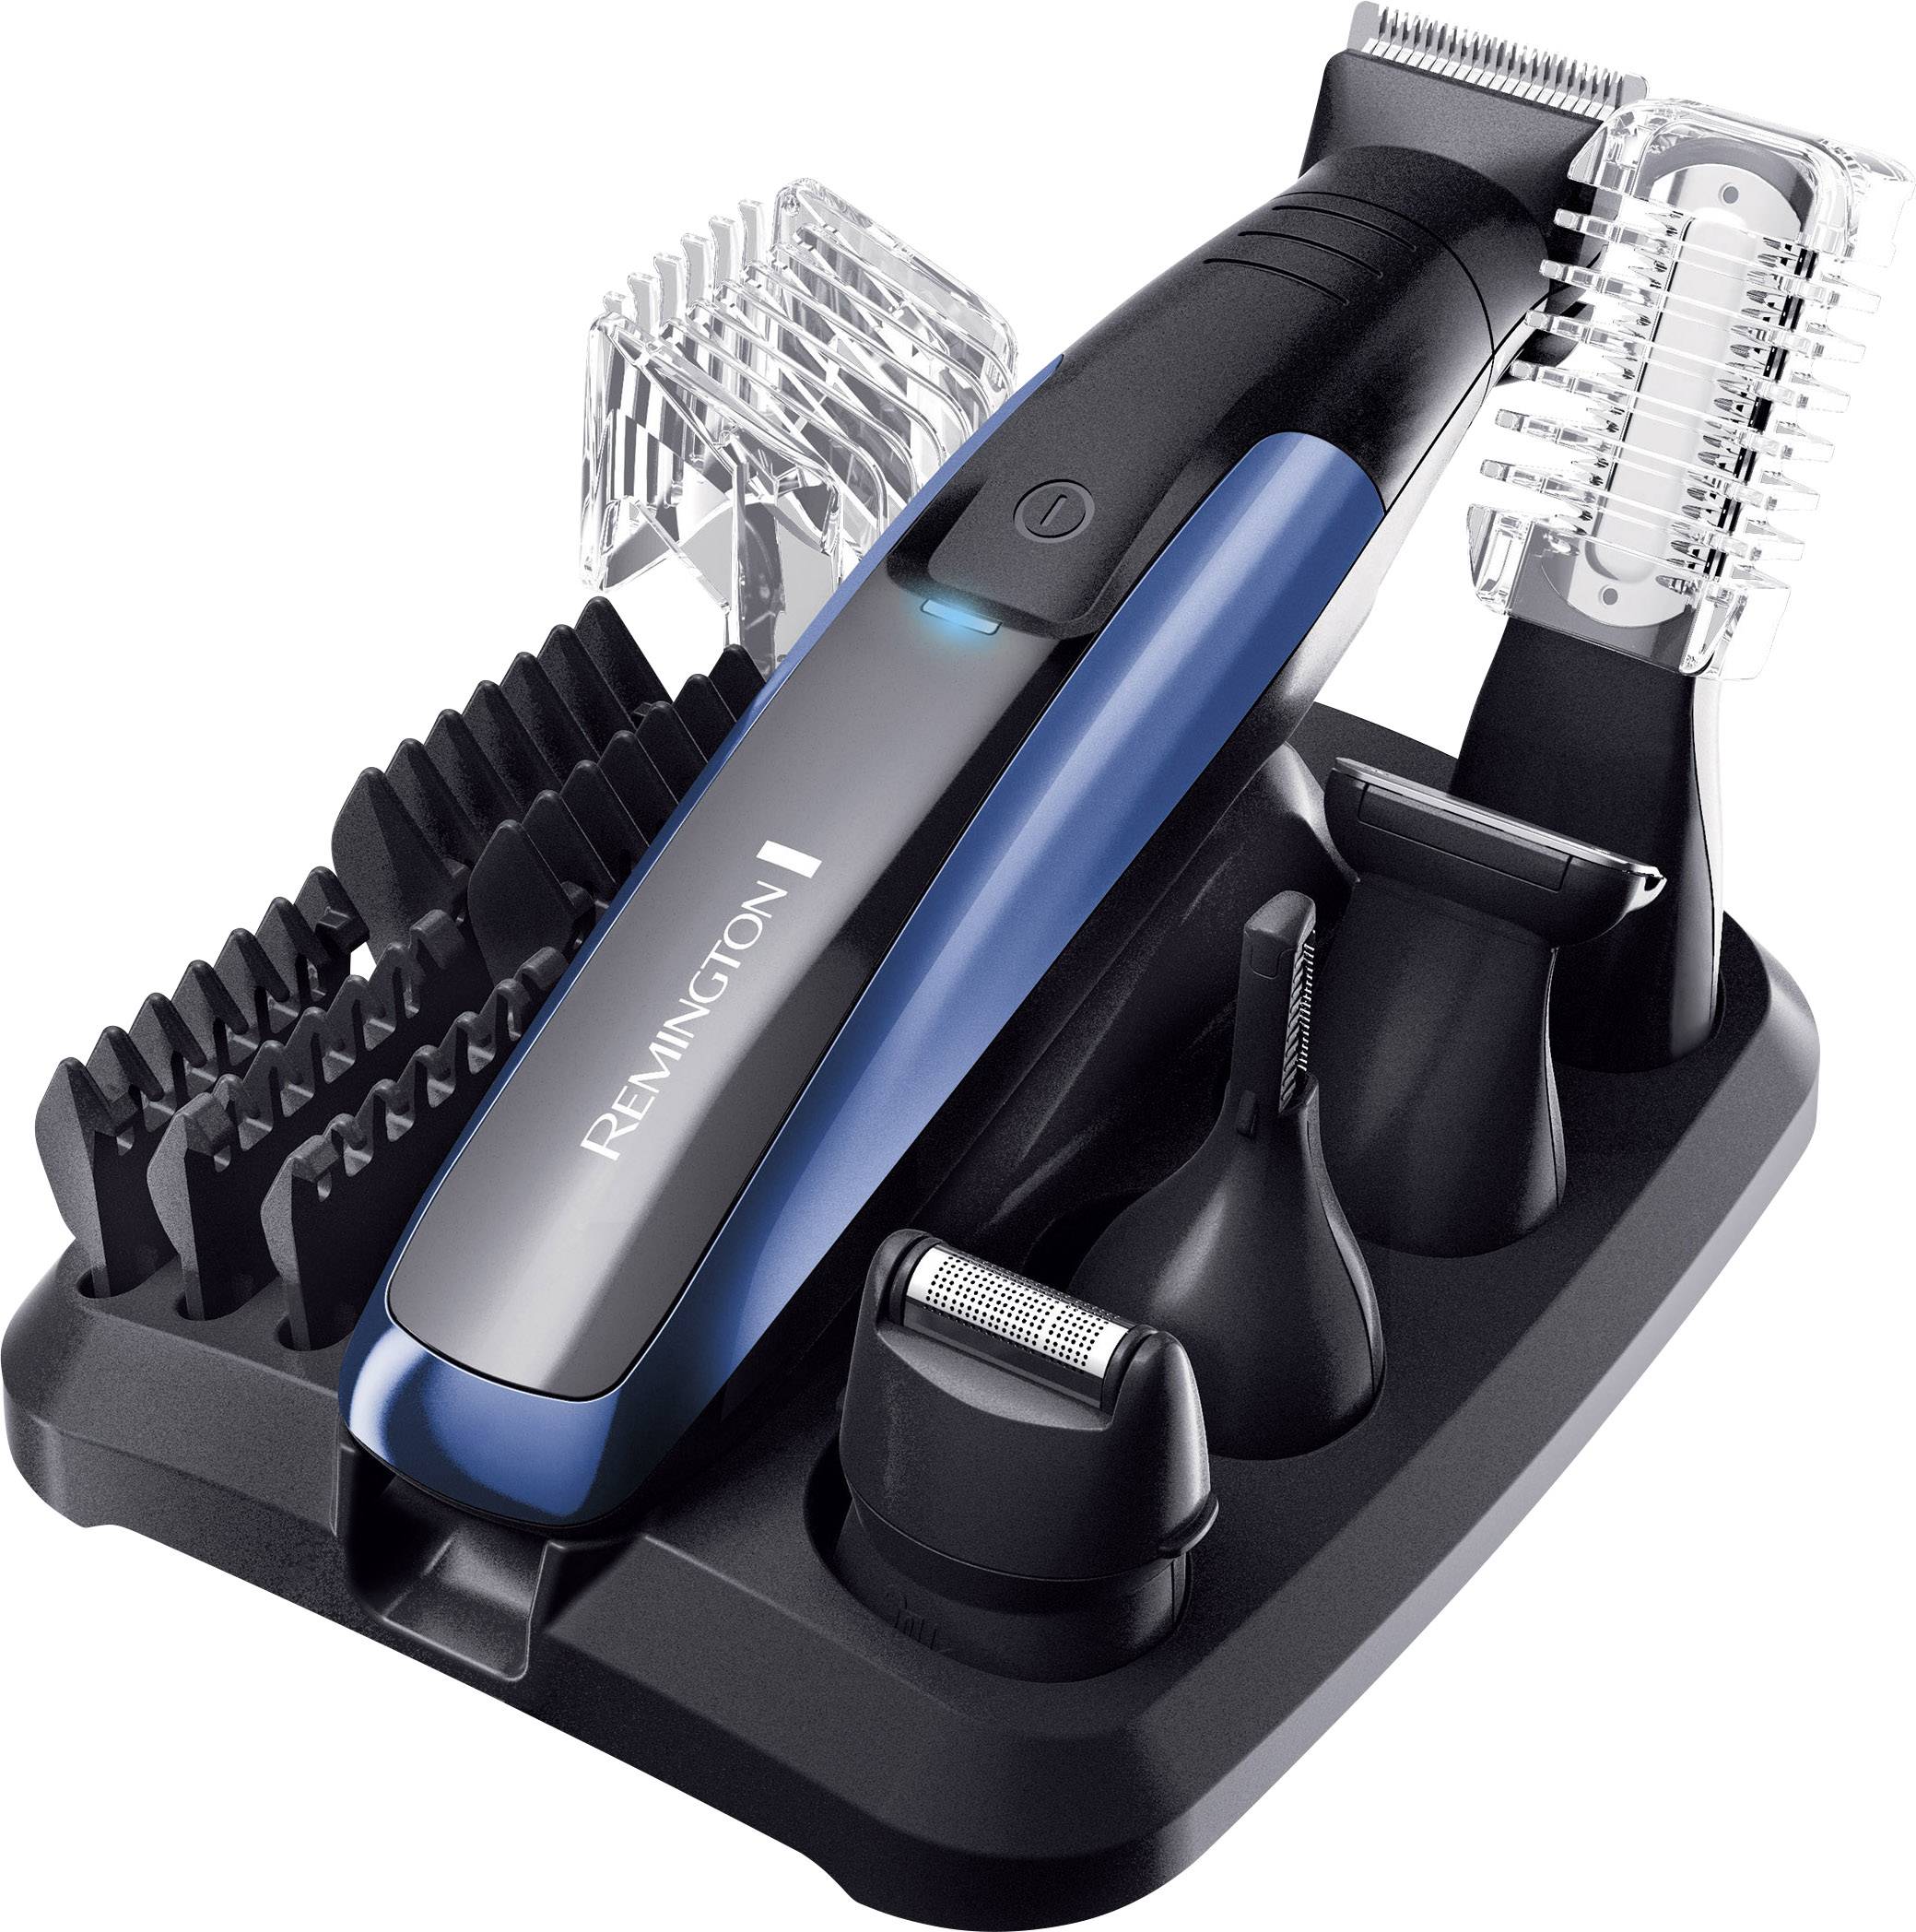 andis 63700 bgrc hair clipper with detachable blade